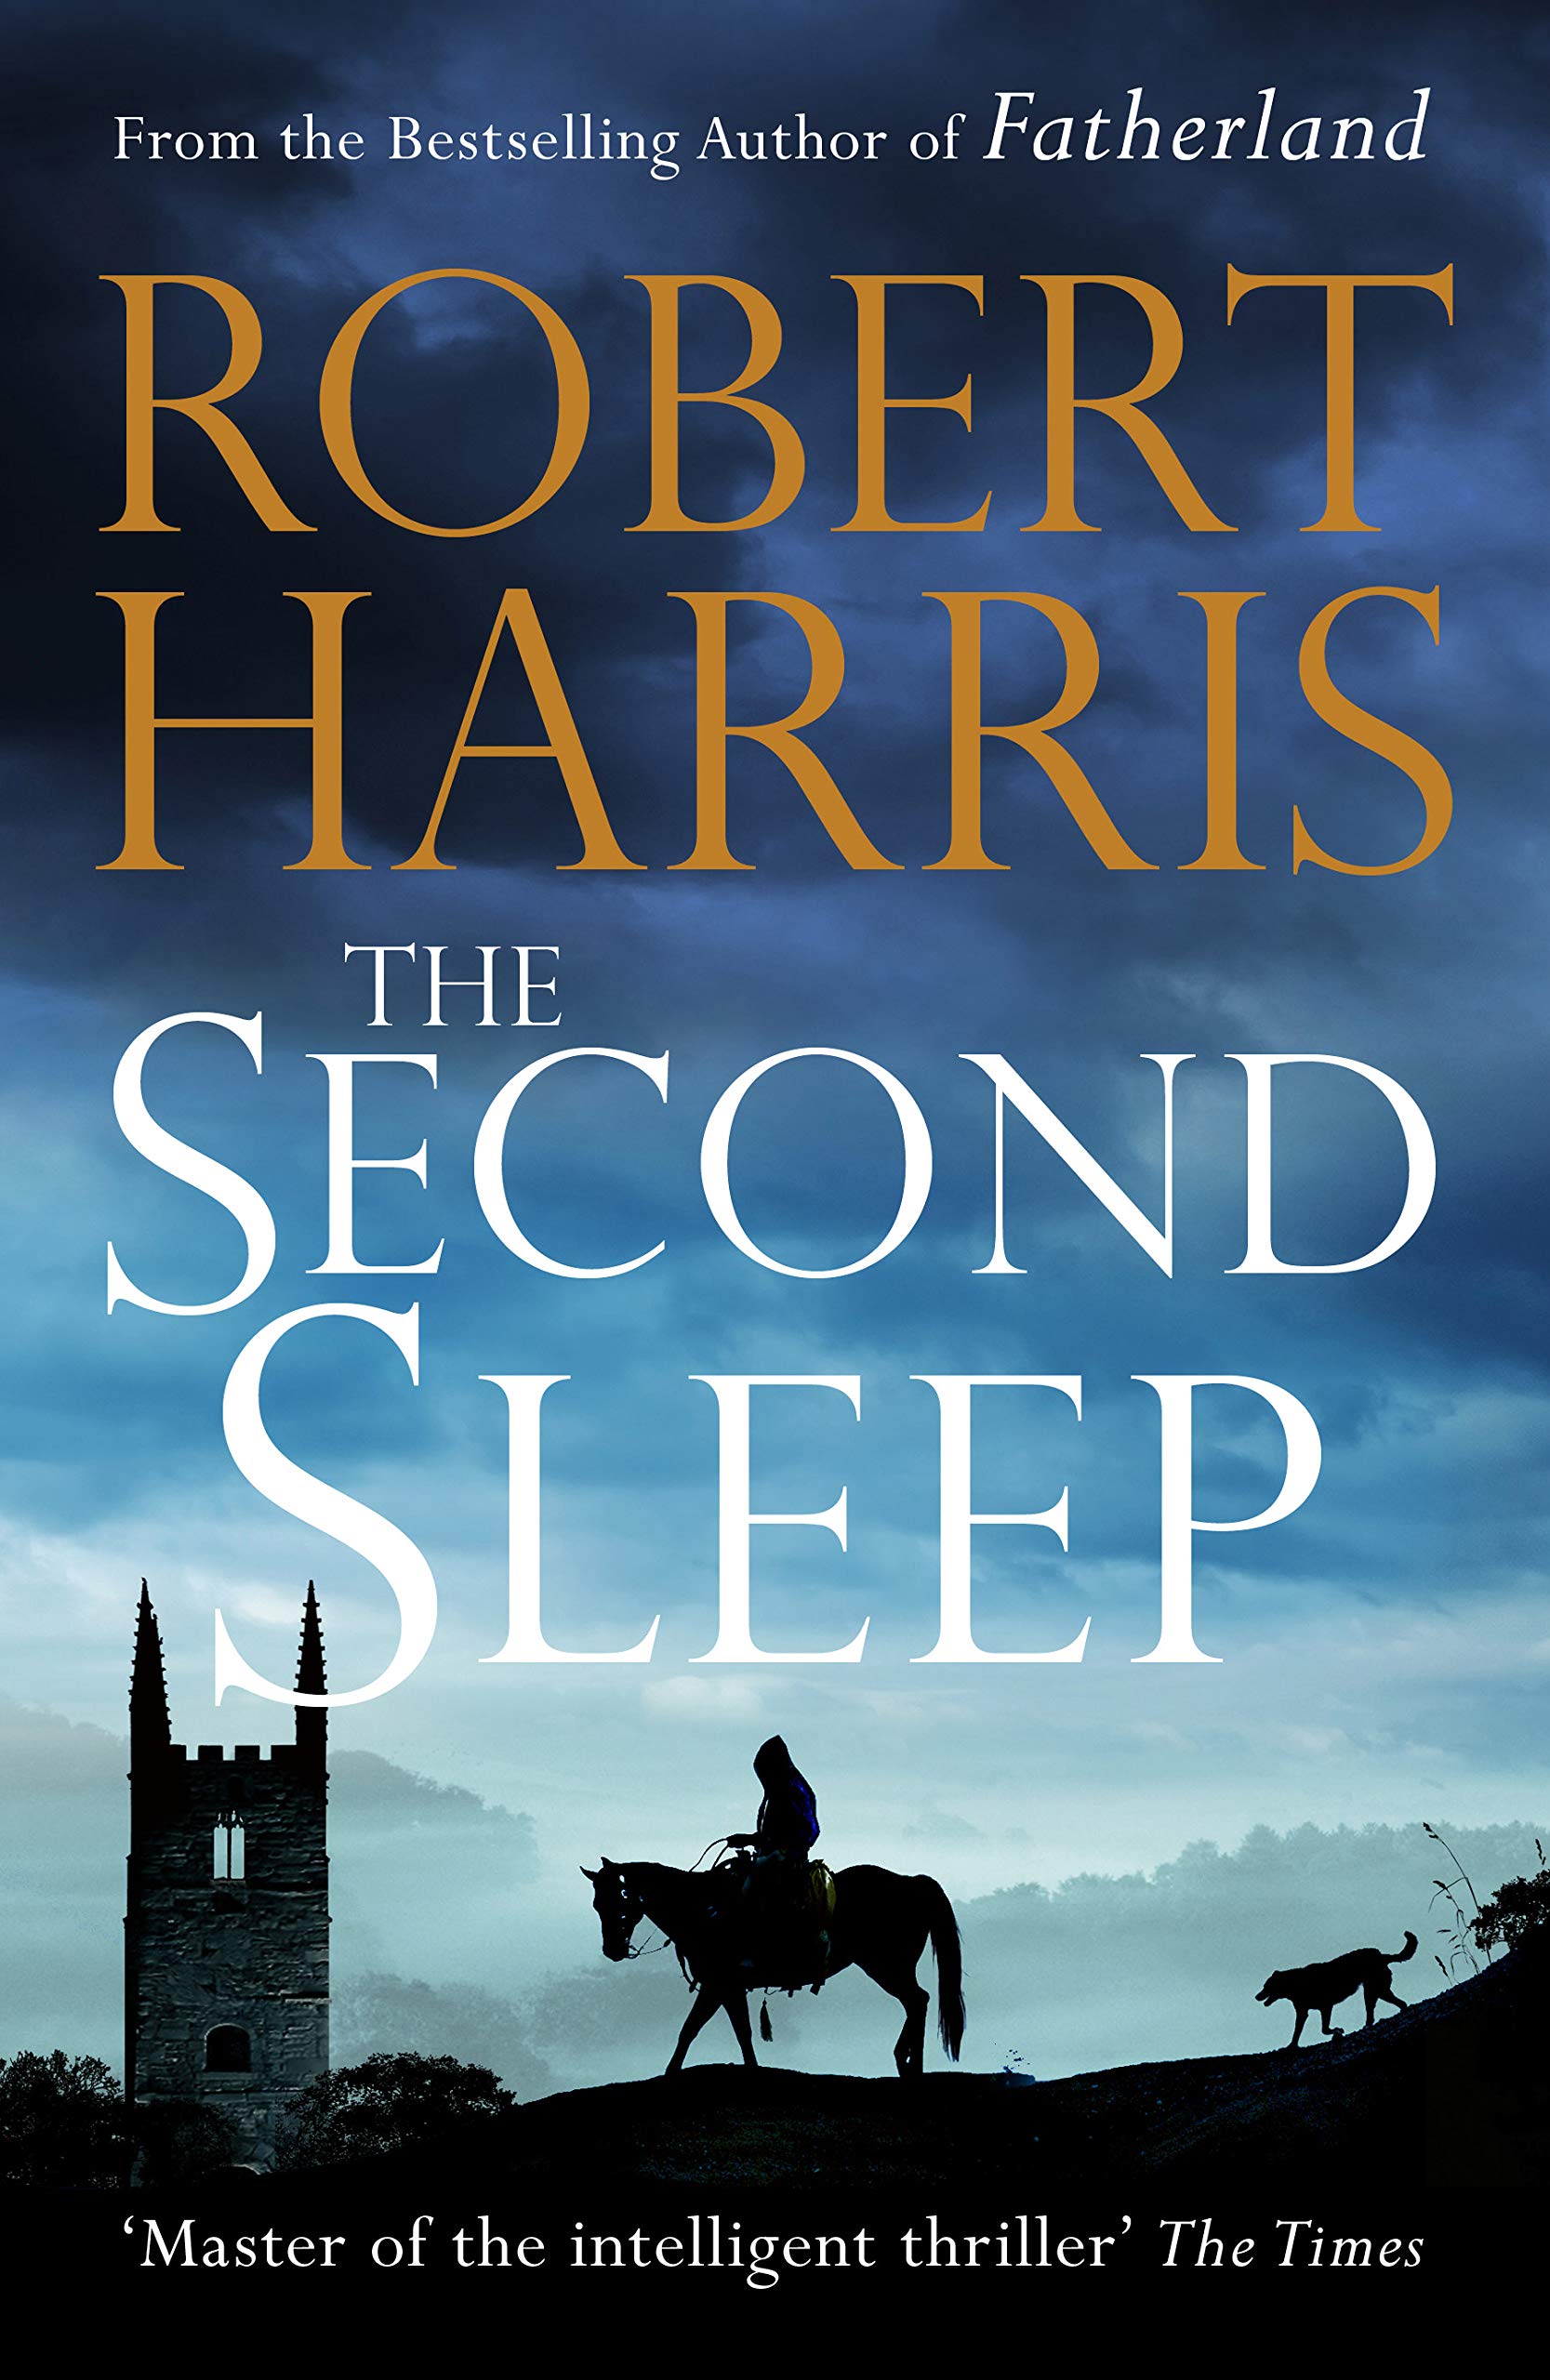 When Does The Second Sleep Book Publish? 2019 New Releases